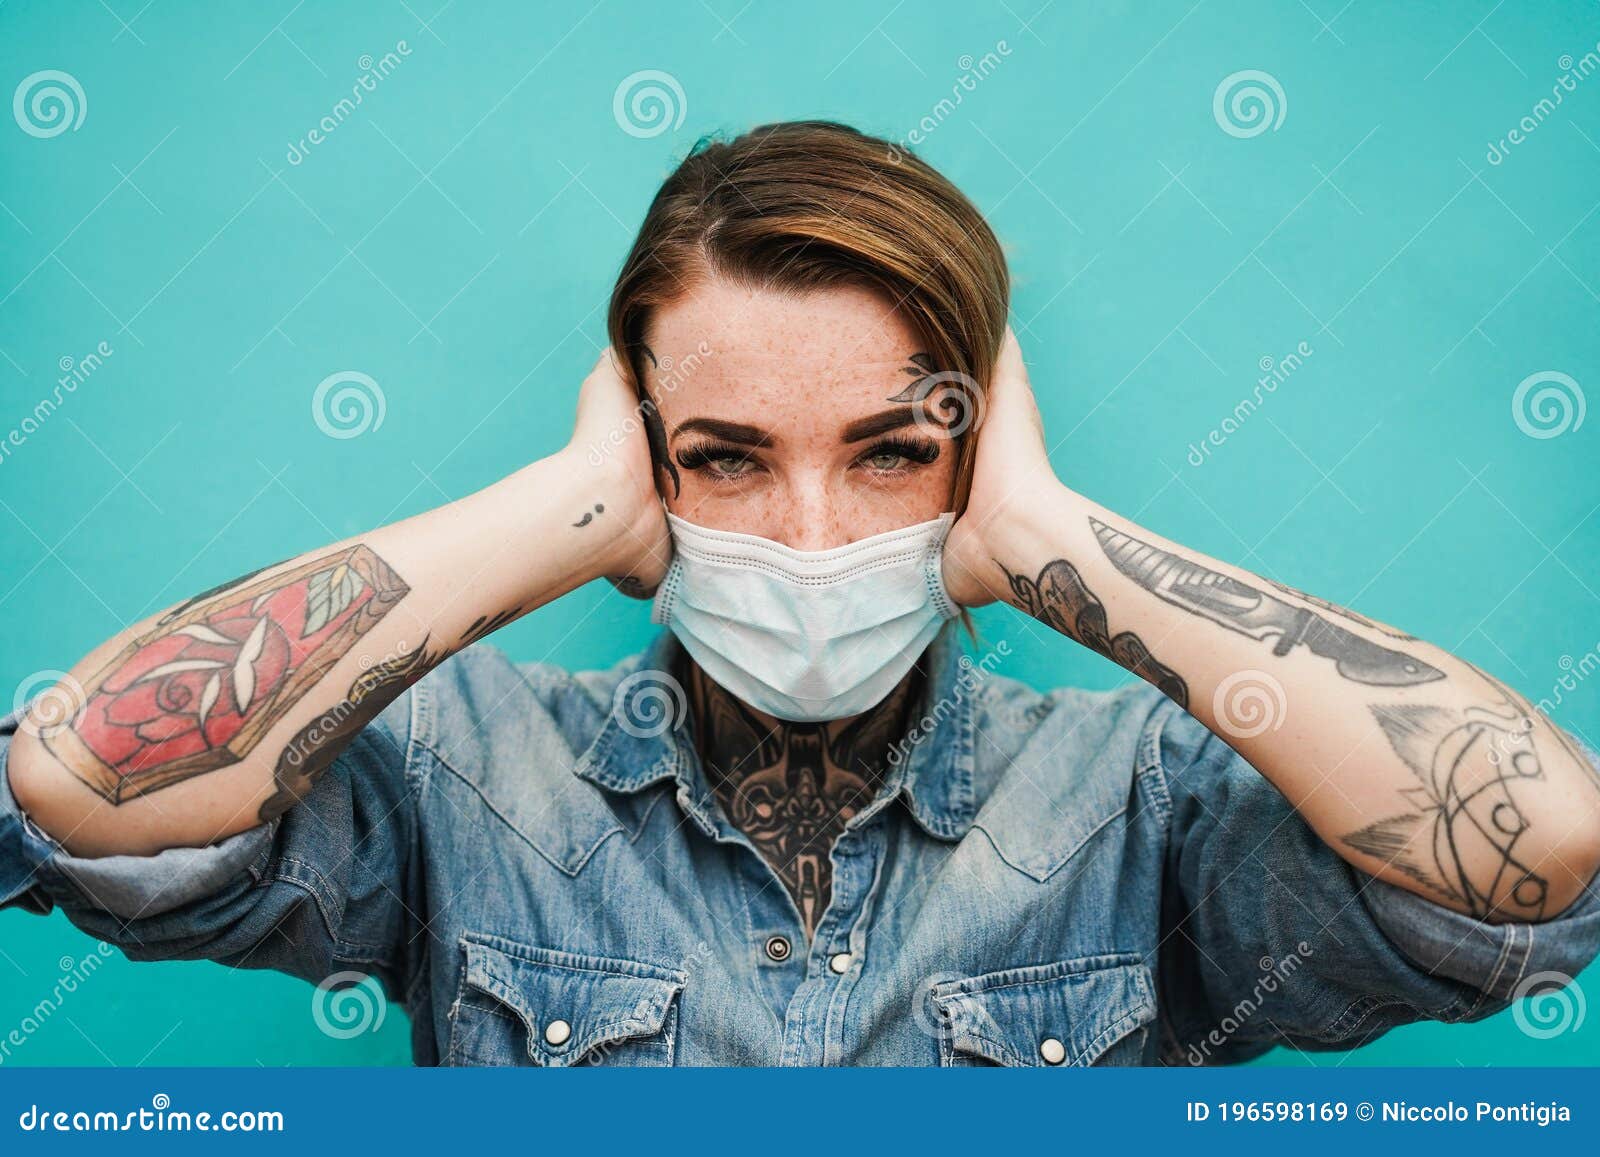 Tattoo girl wearing face protective mask during coronavirus outbreak - Follow safety measures